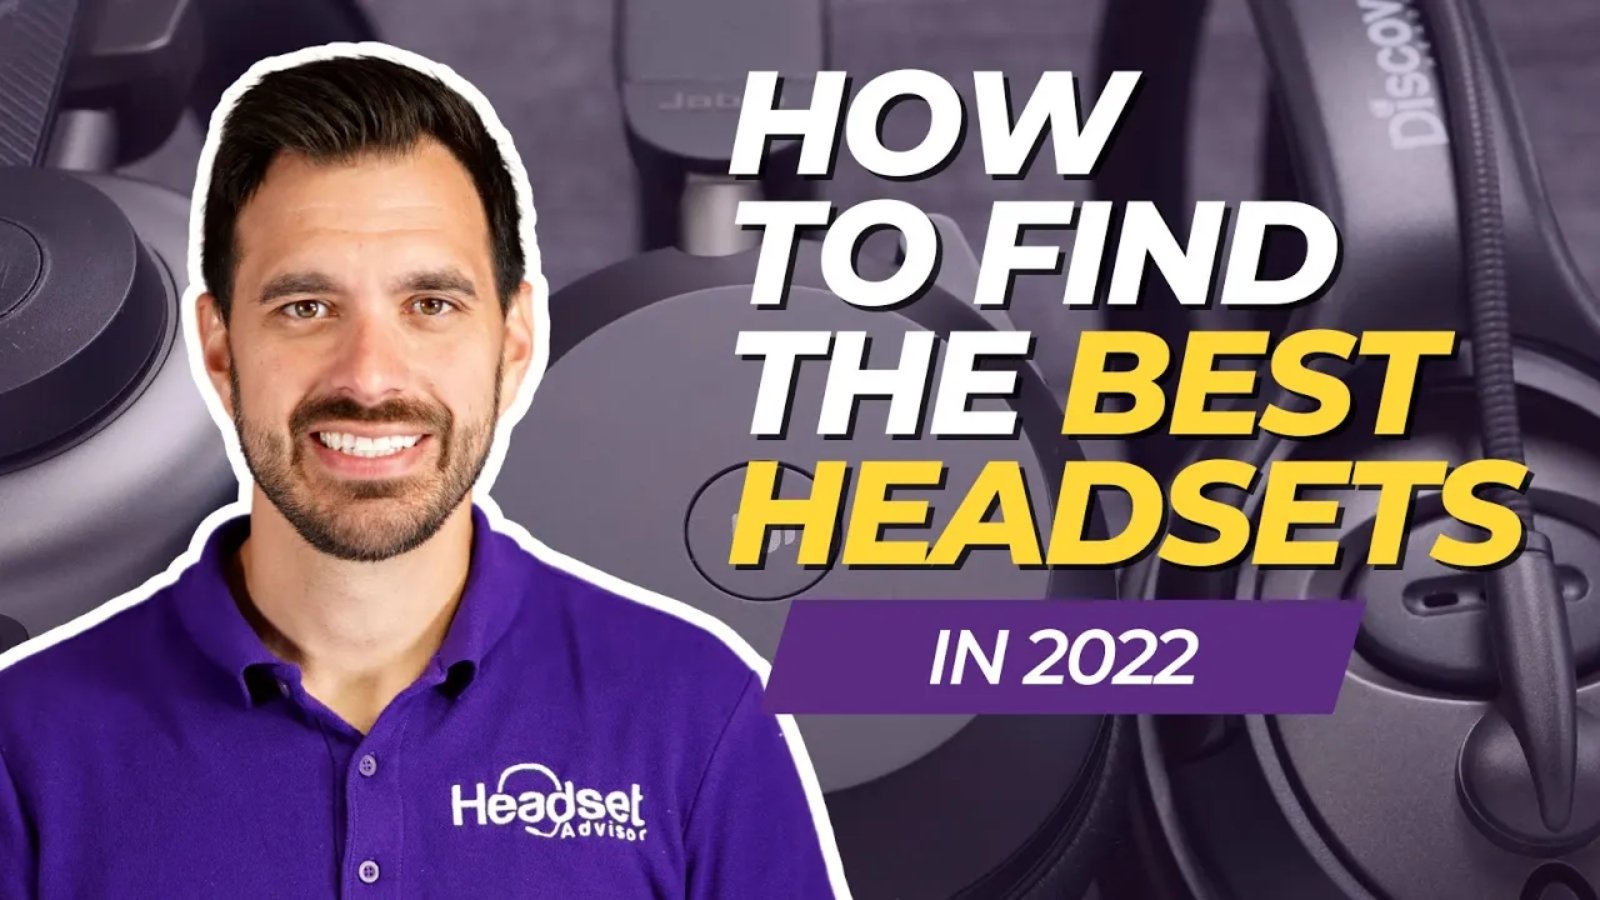 How To Find The Best Headsets 2022 - Headset Advisor